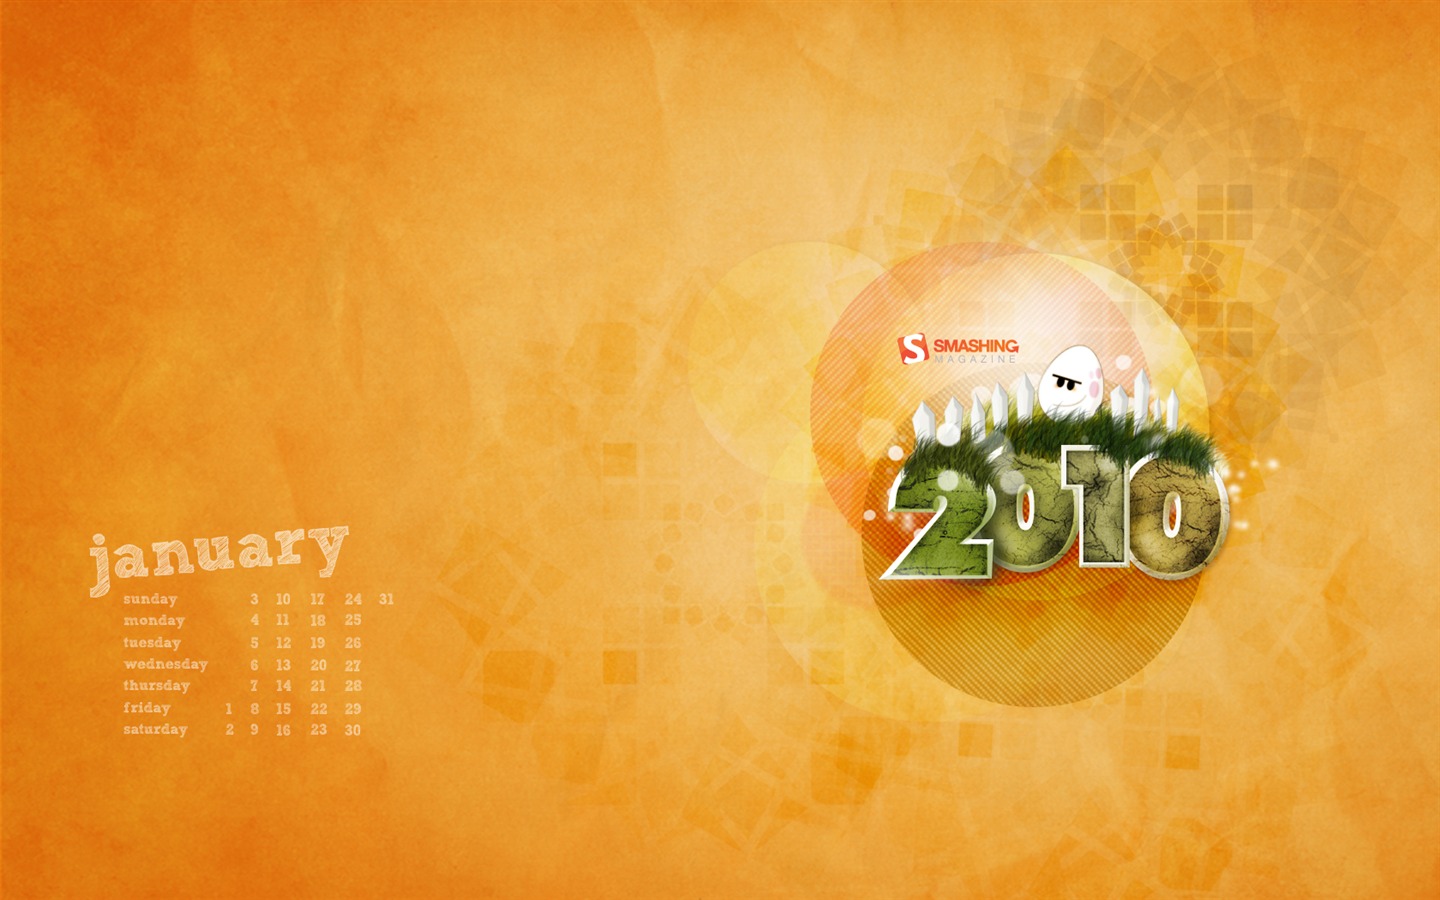 Microsoft Official Win7 Neujahr Wallpapers #8 - 1440x900